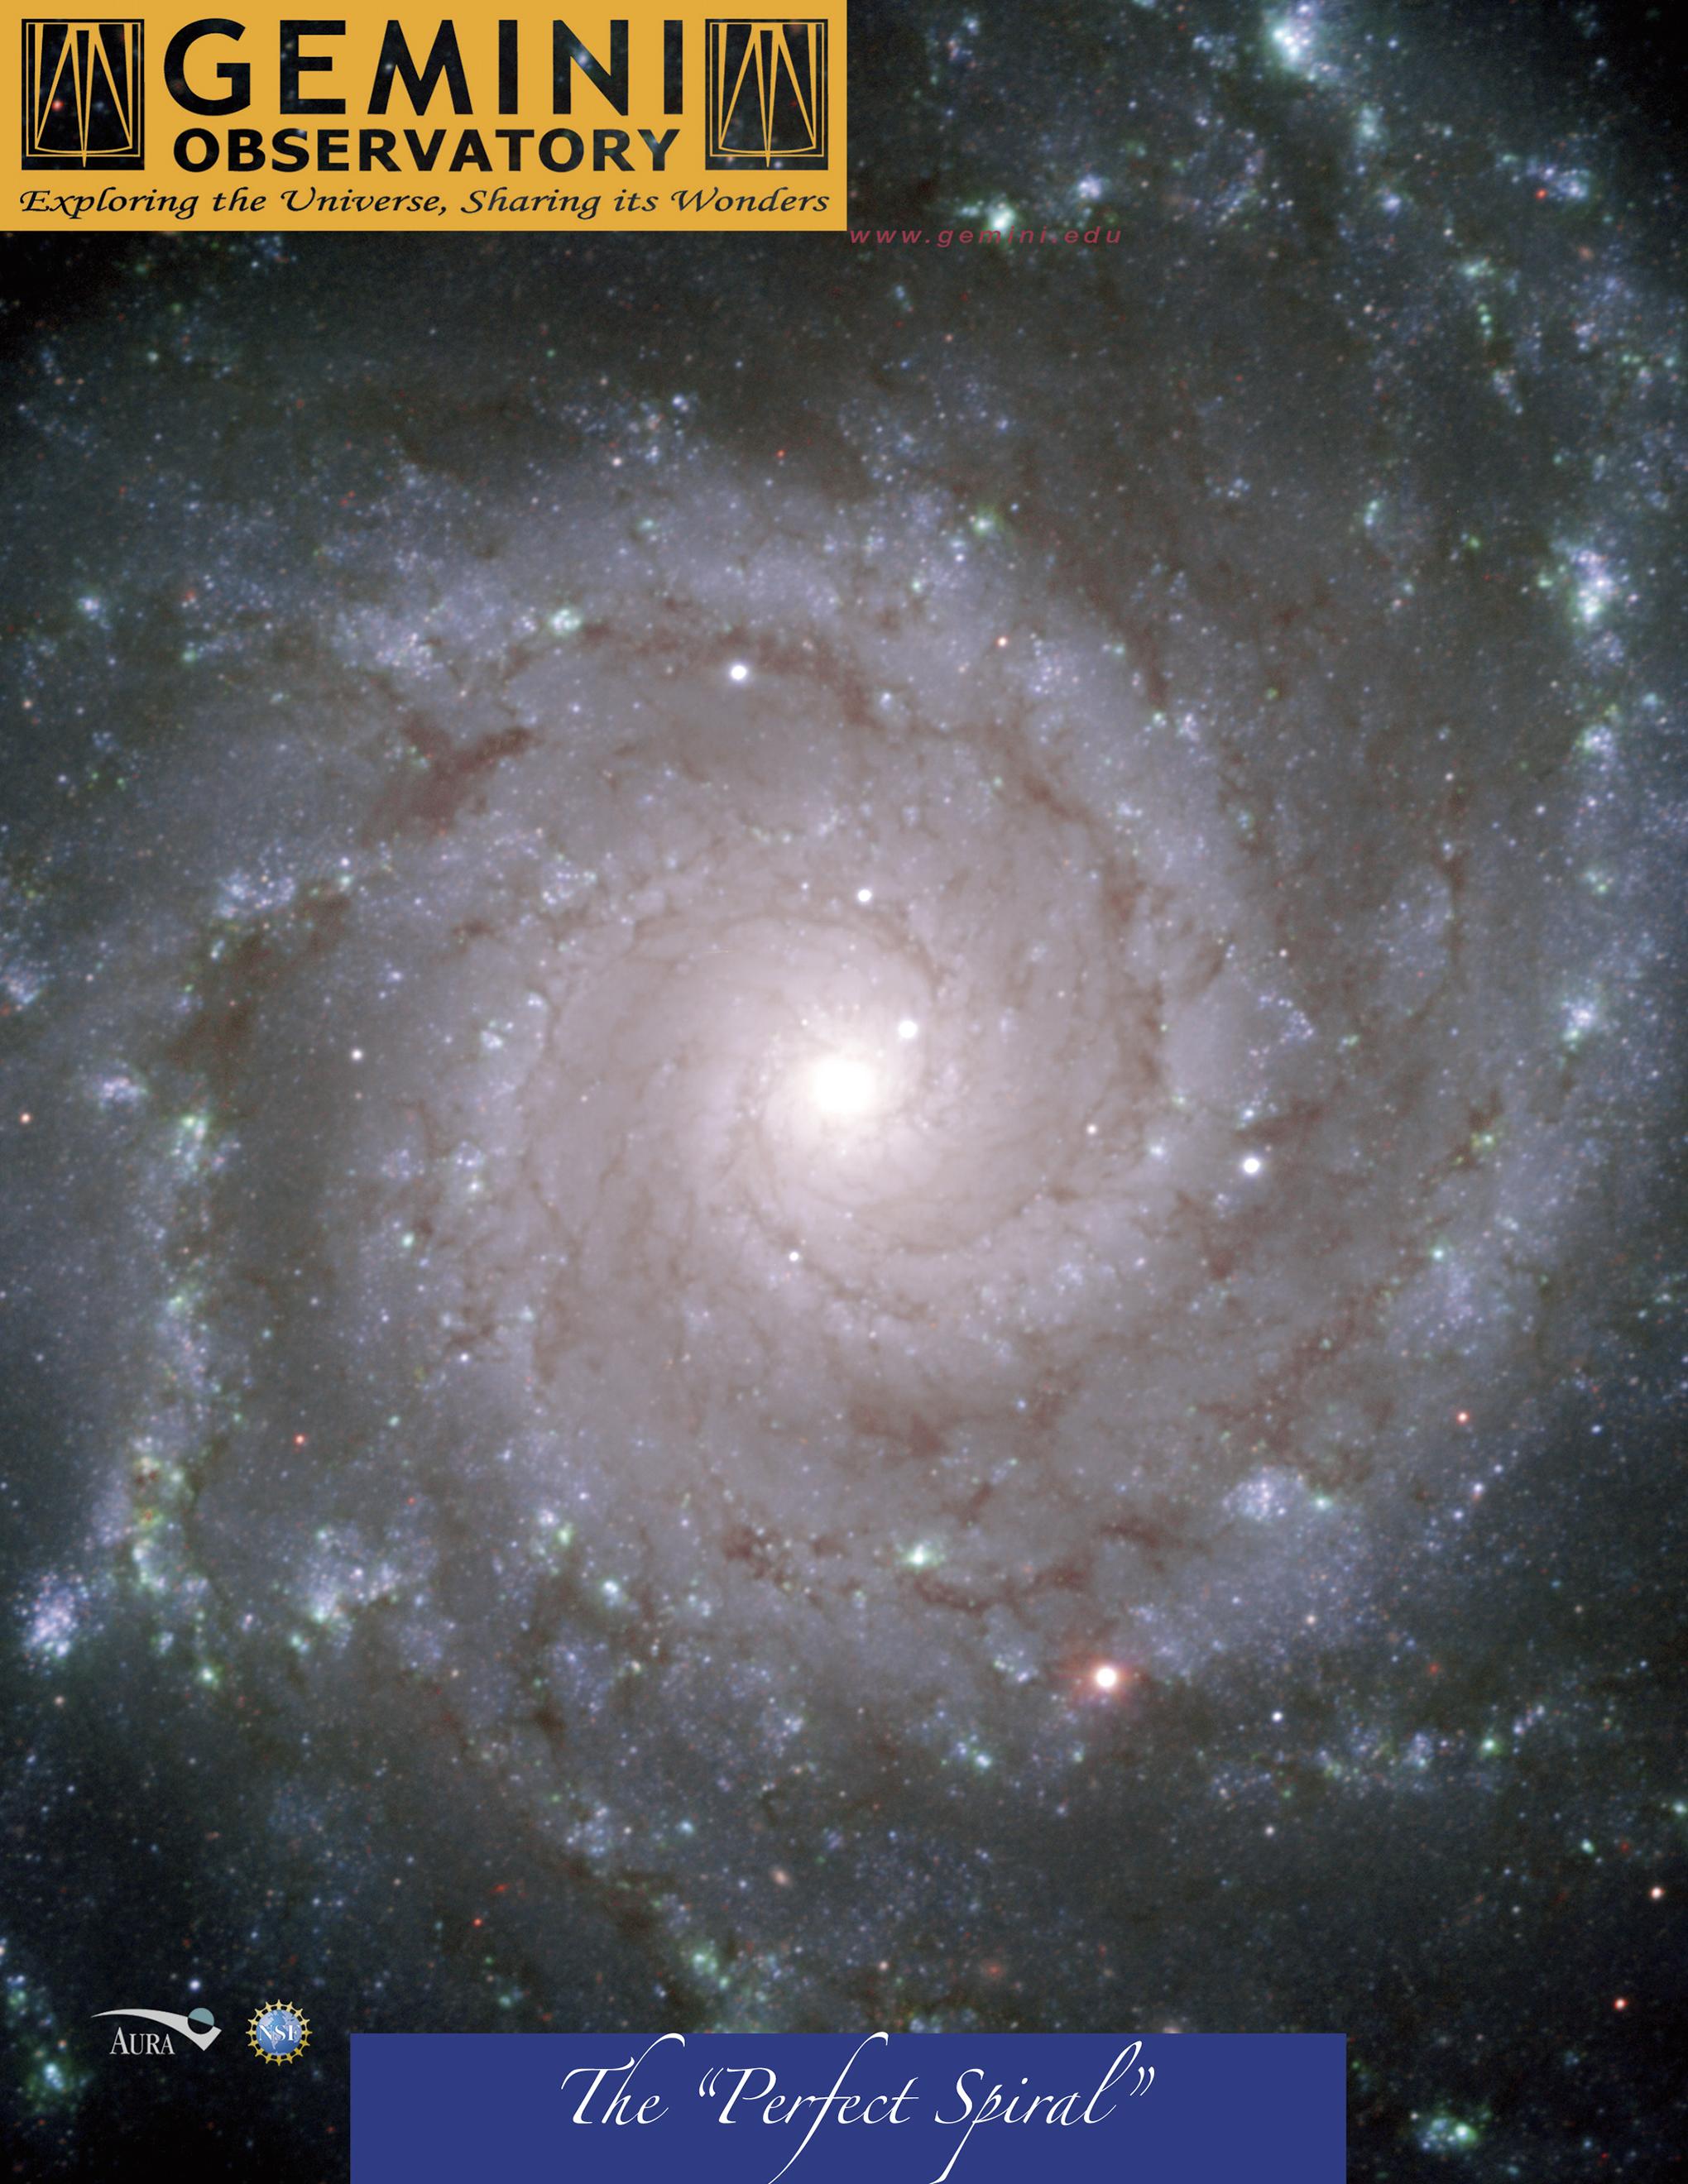 The "Perfect Spiral" M 74